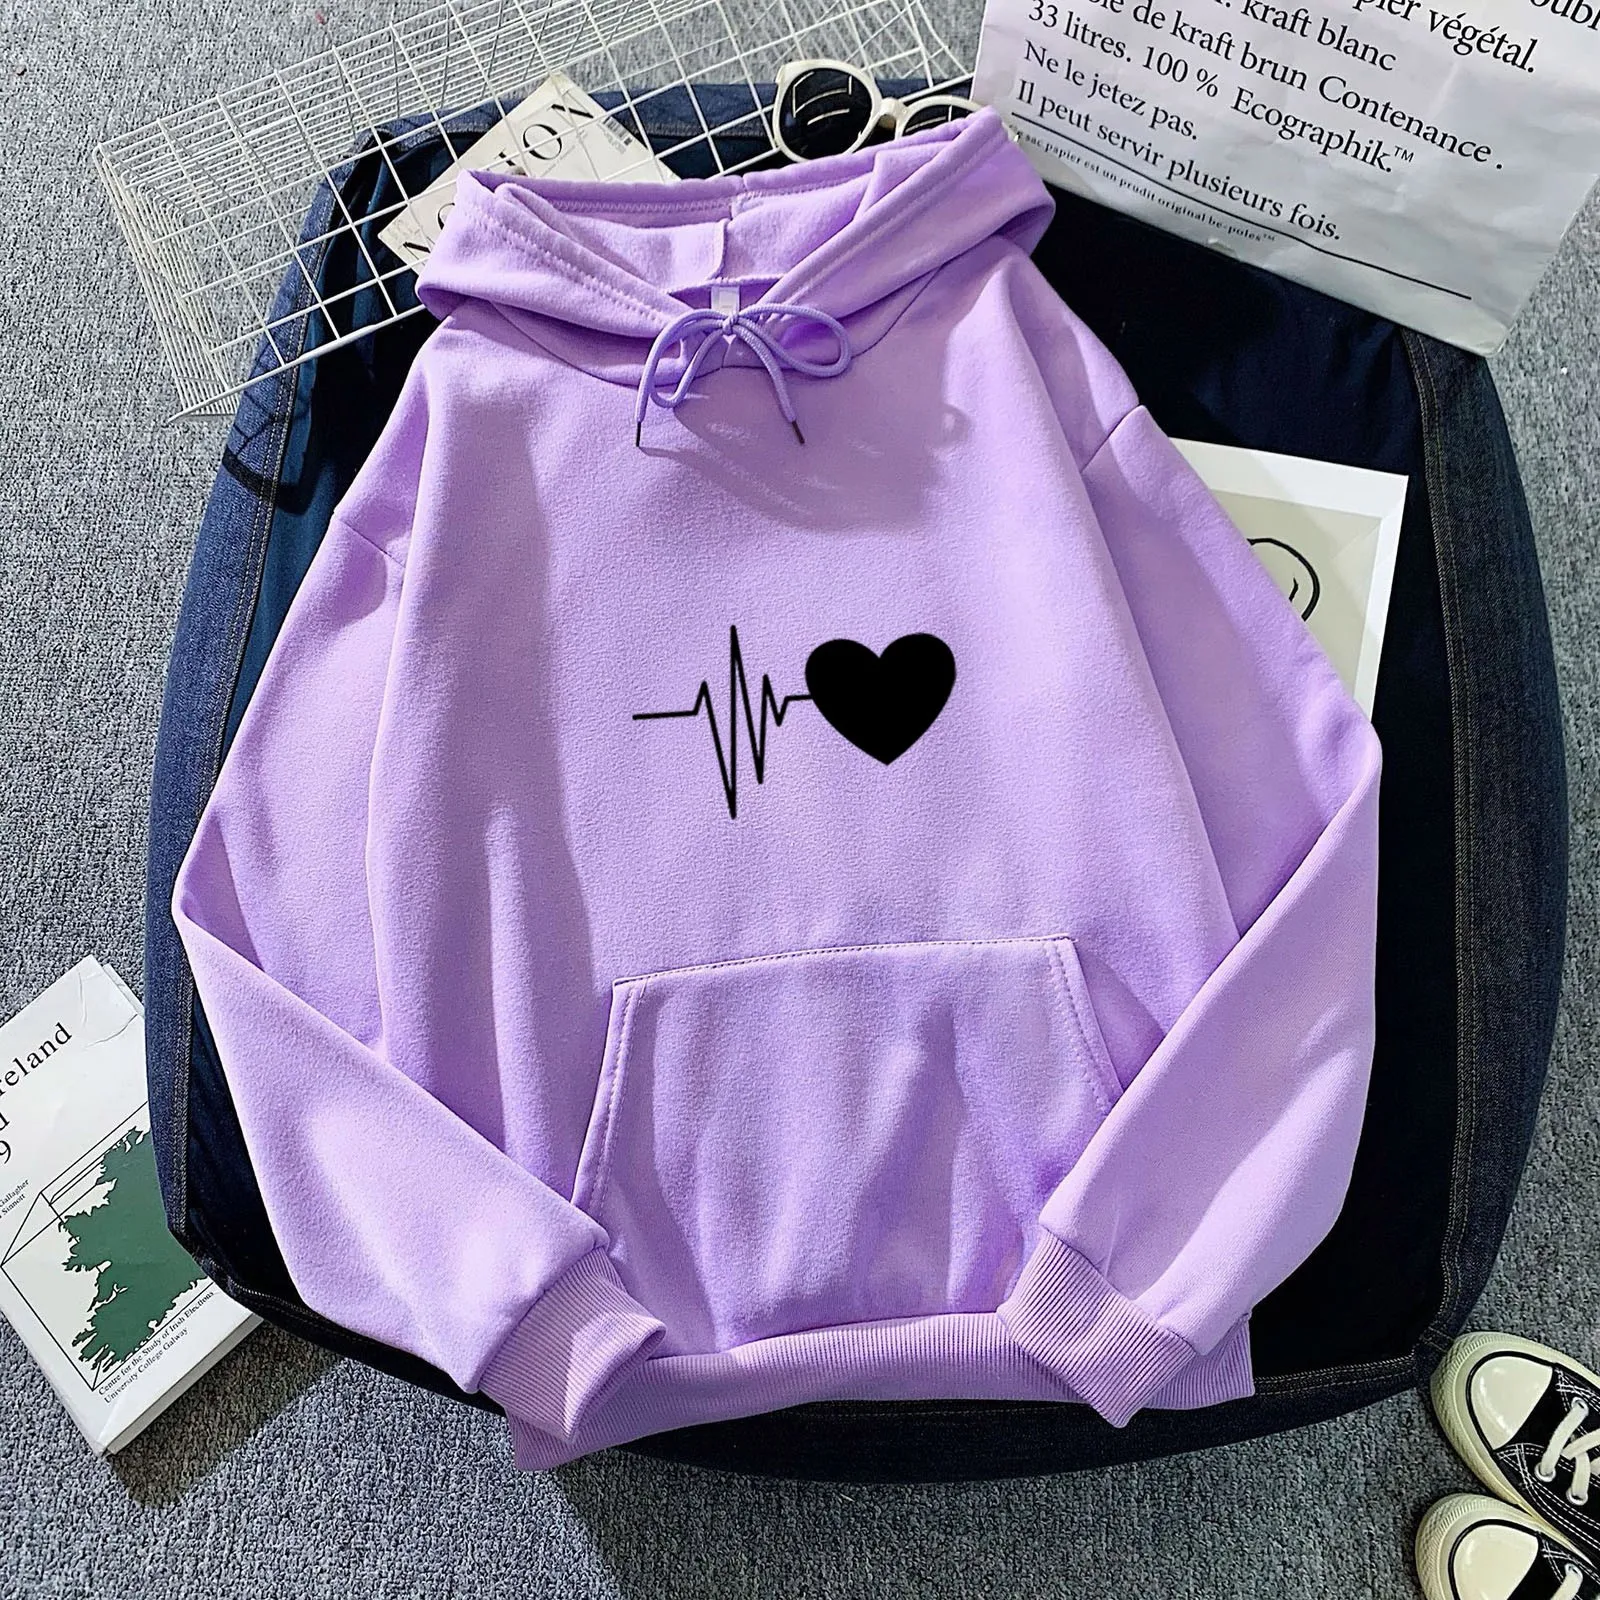 Plus Size Women's Hoodies With Pocket Casual Heart Printing Women Sweetshirts Oversized Hoodie Sudaderas Con Capucha Ropa Mujer pink hoodie